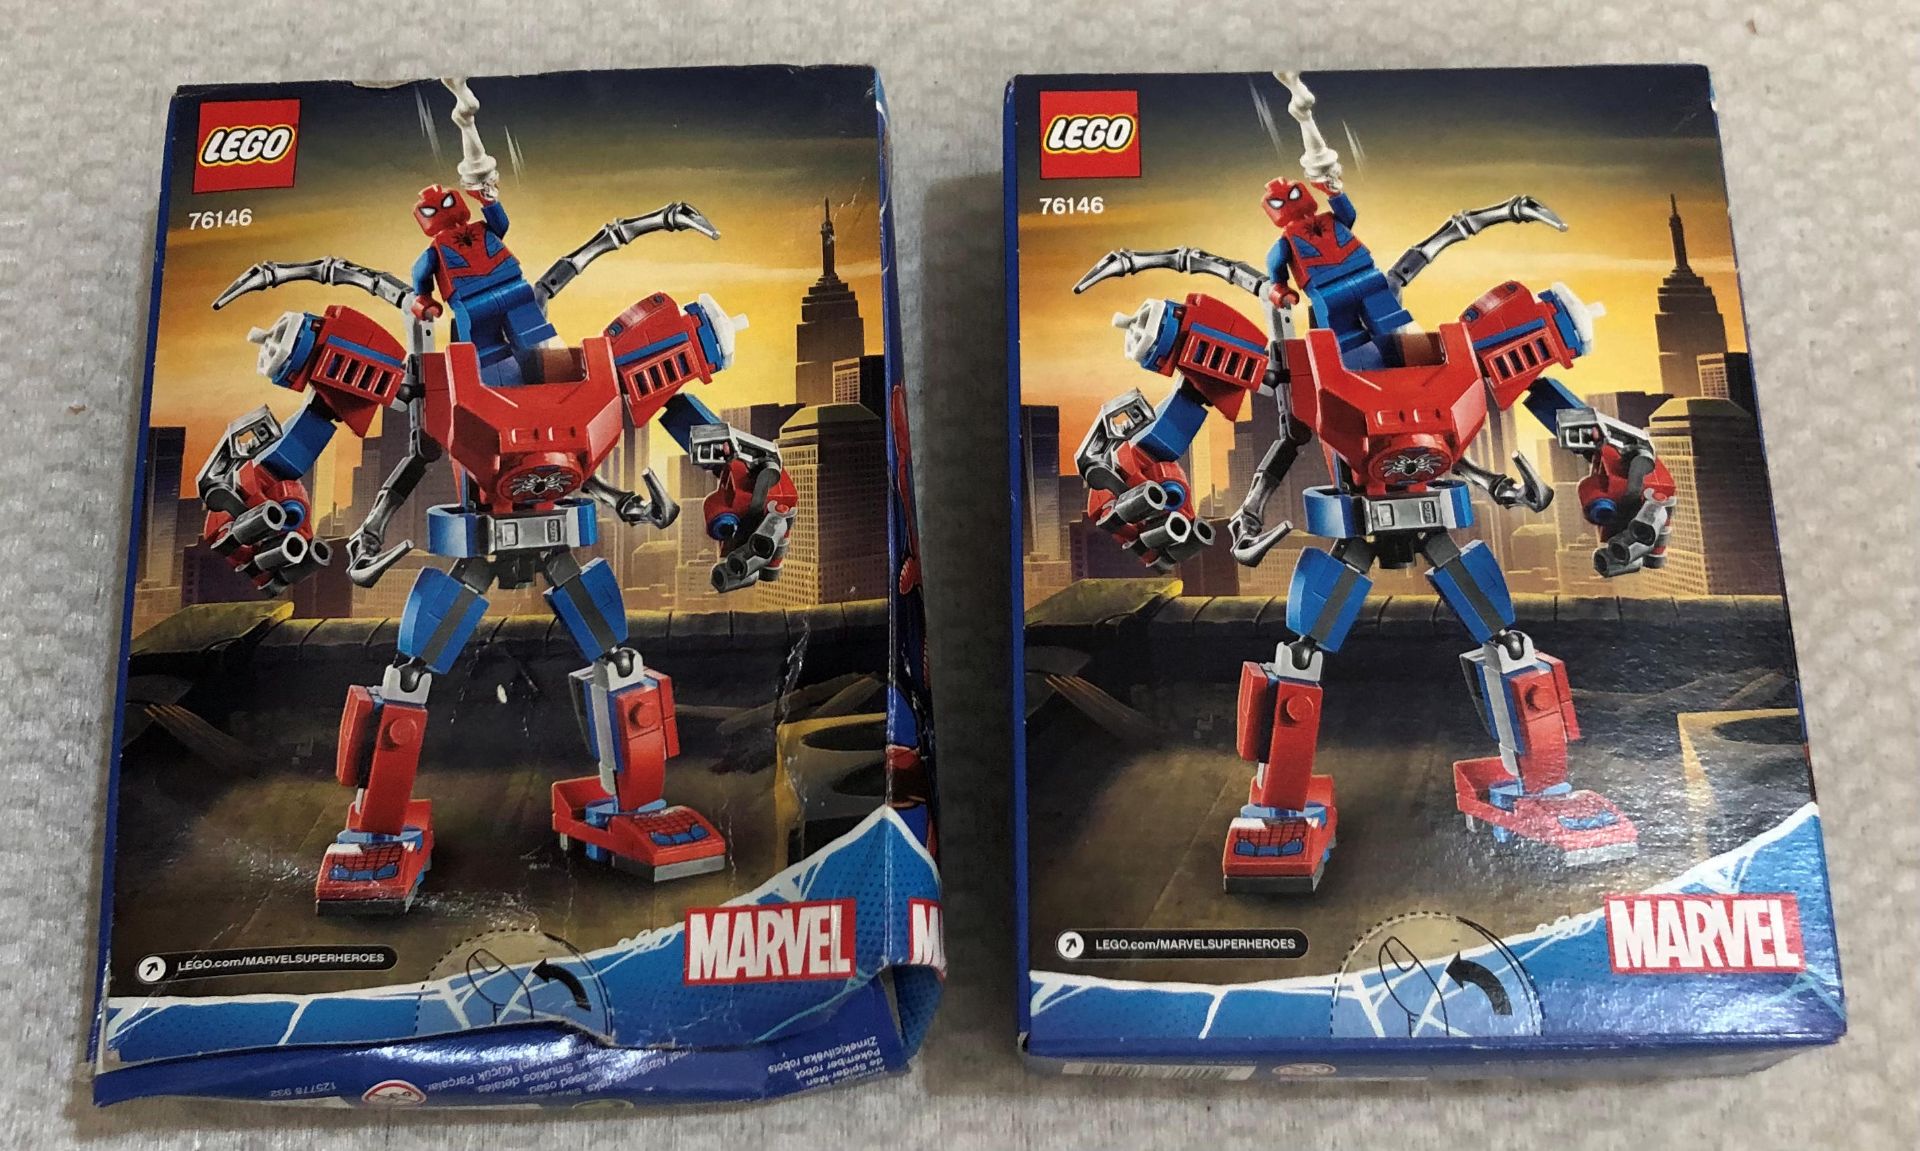 2 x Lego Marvel Spider-Man Mech - Set 76146 - New/Boxed - HTYS326 - CL987 - Location: Altrincham - Image 3 of 3